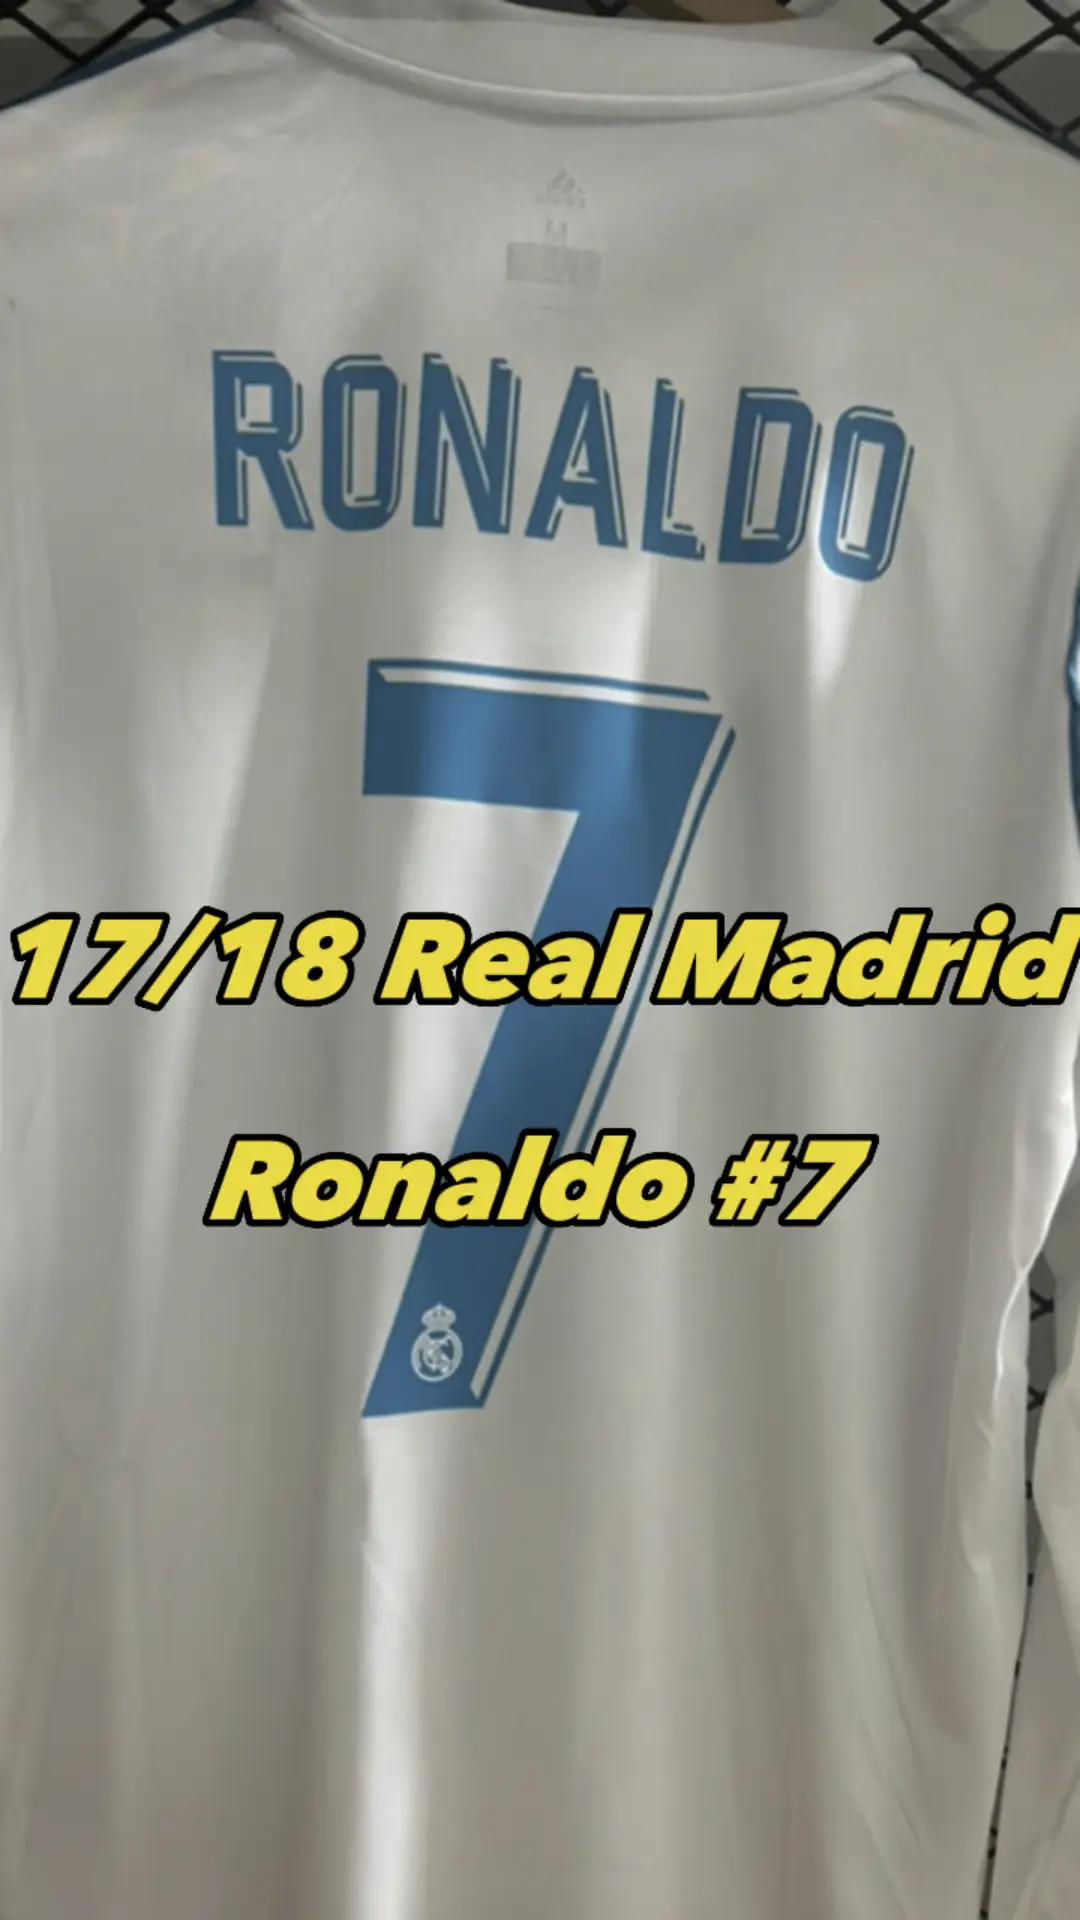 17/18 real madrid jersey